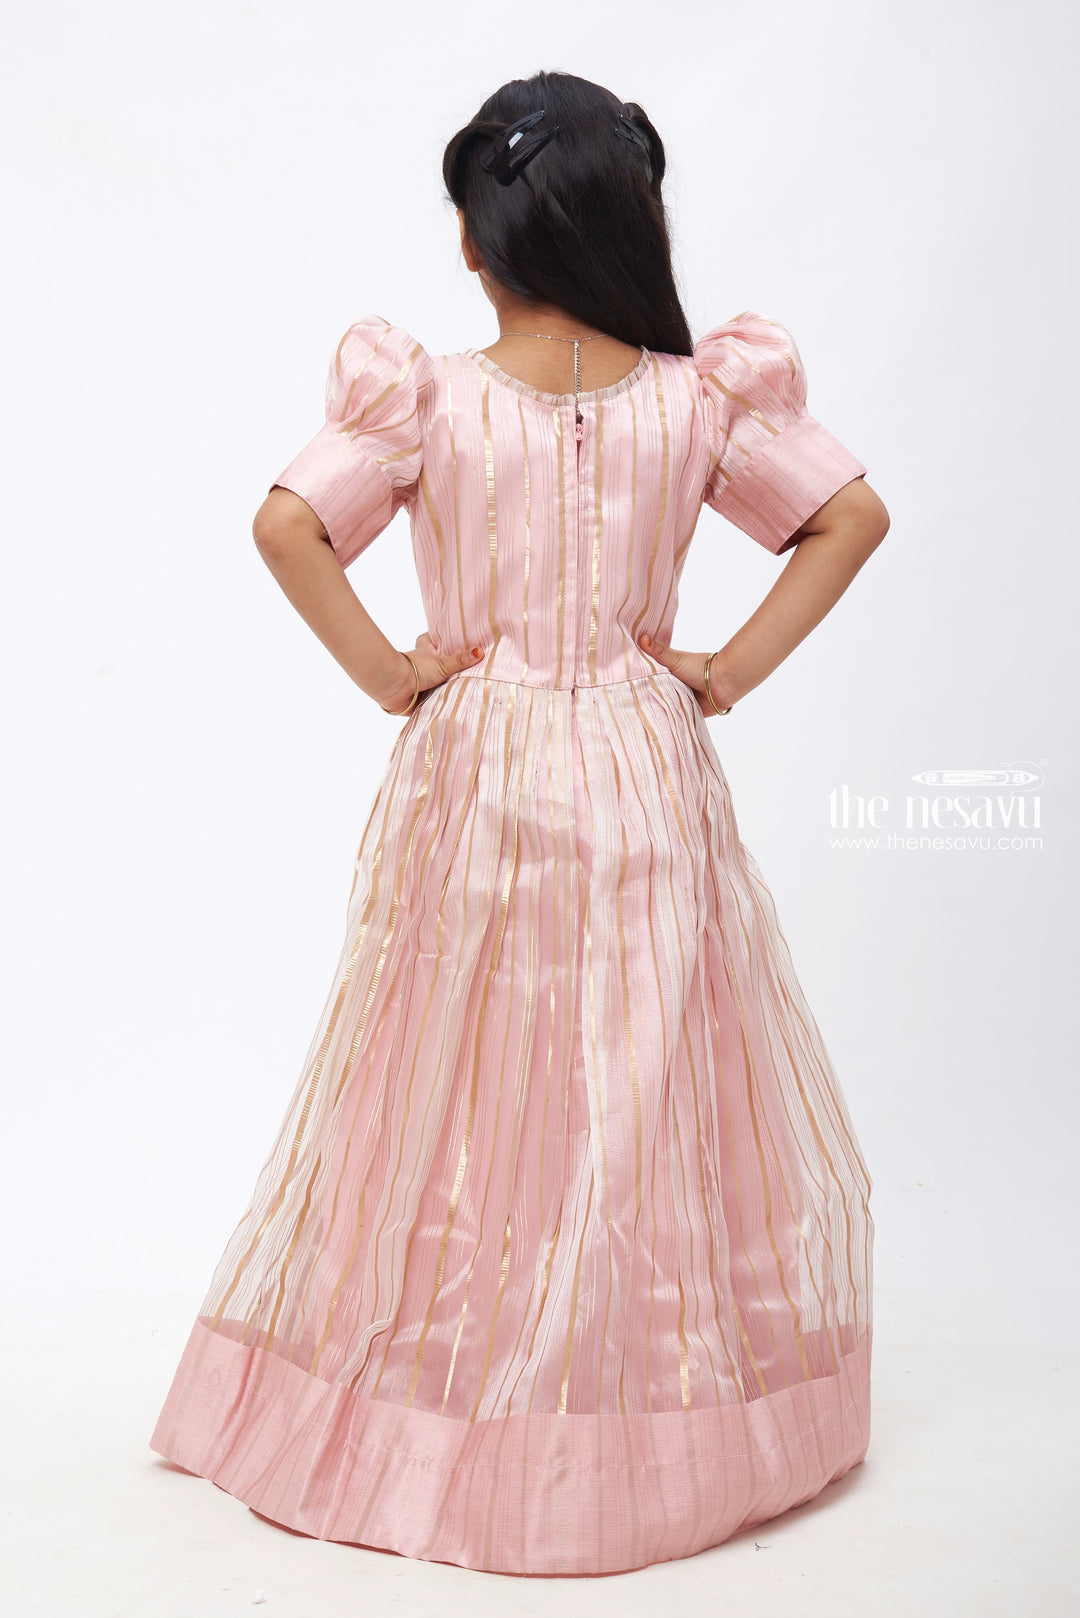 The Nesavu Girls Party Gown Ethereal Elegance: Pink Mirror Embroidered Anarkali Gown for Girls Nesavu Girls Anarkali Gowns | Traditional Elegance for Festive Moments | The Nesavu